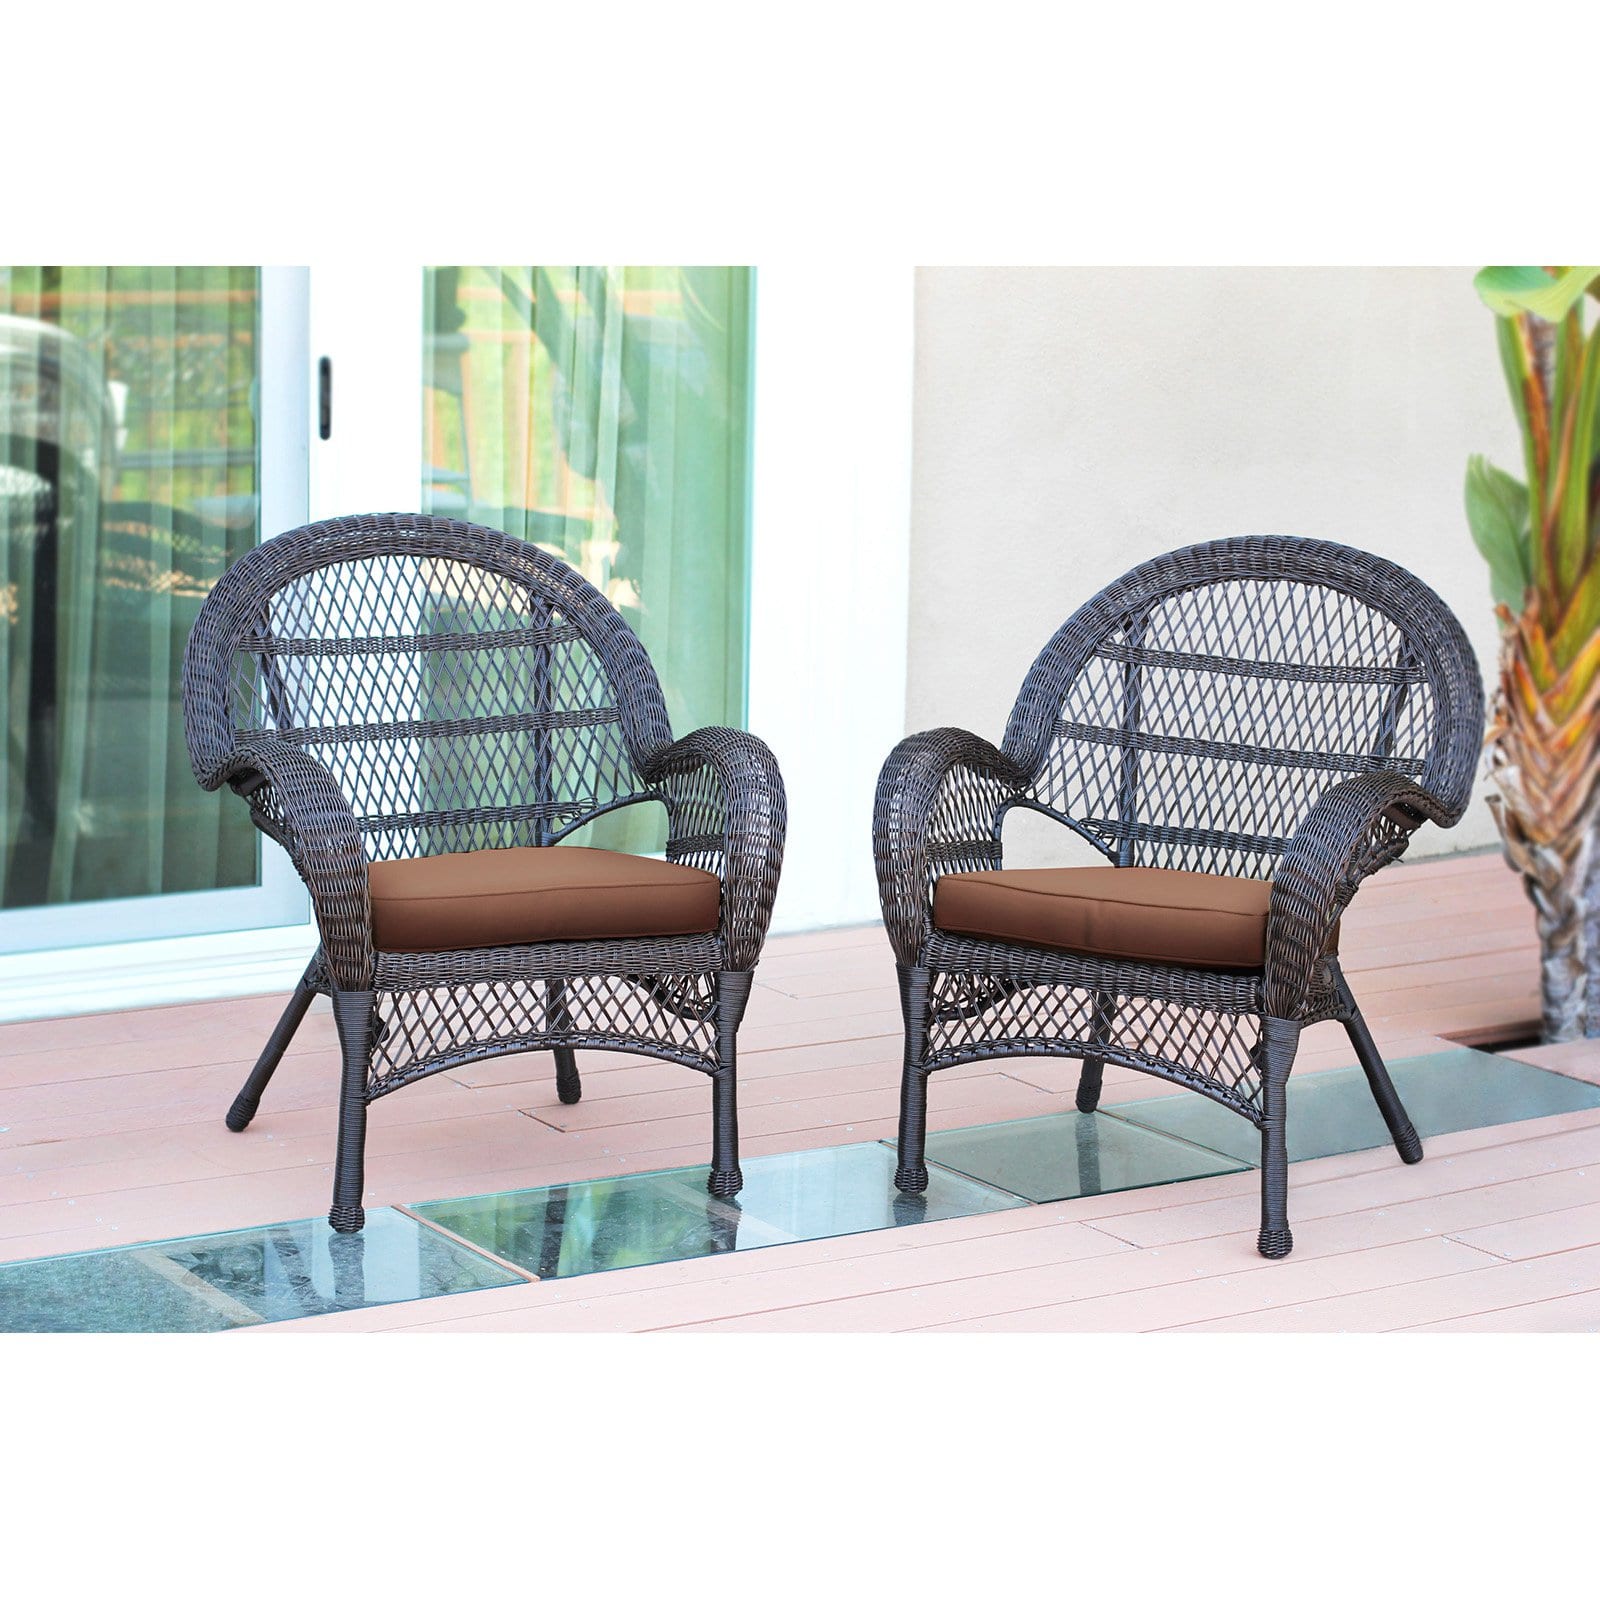 Jeco Wicker Chair in Espresso with Green Cushion (Set of 2) - image 2 of 11